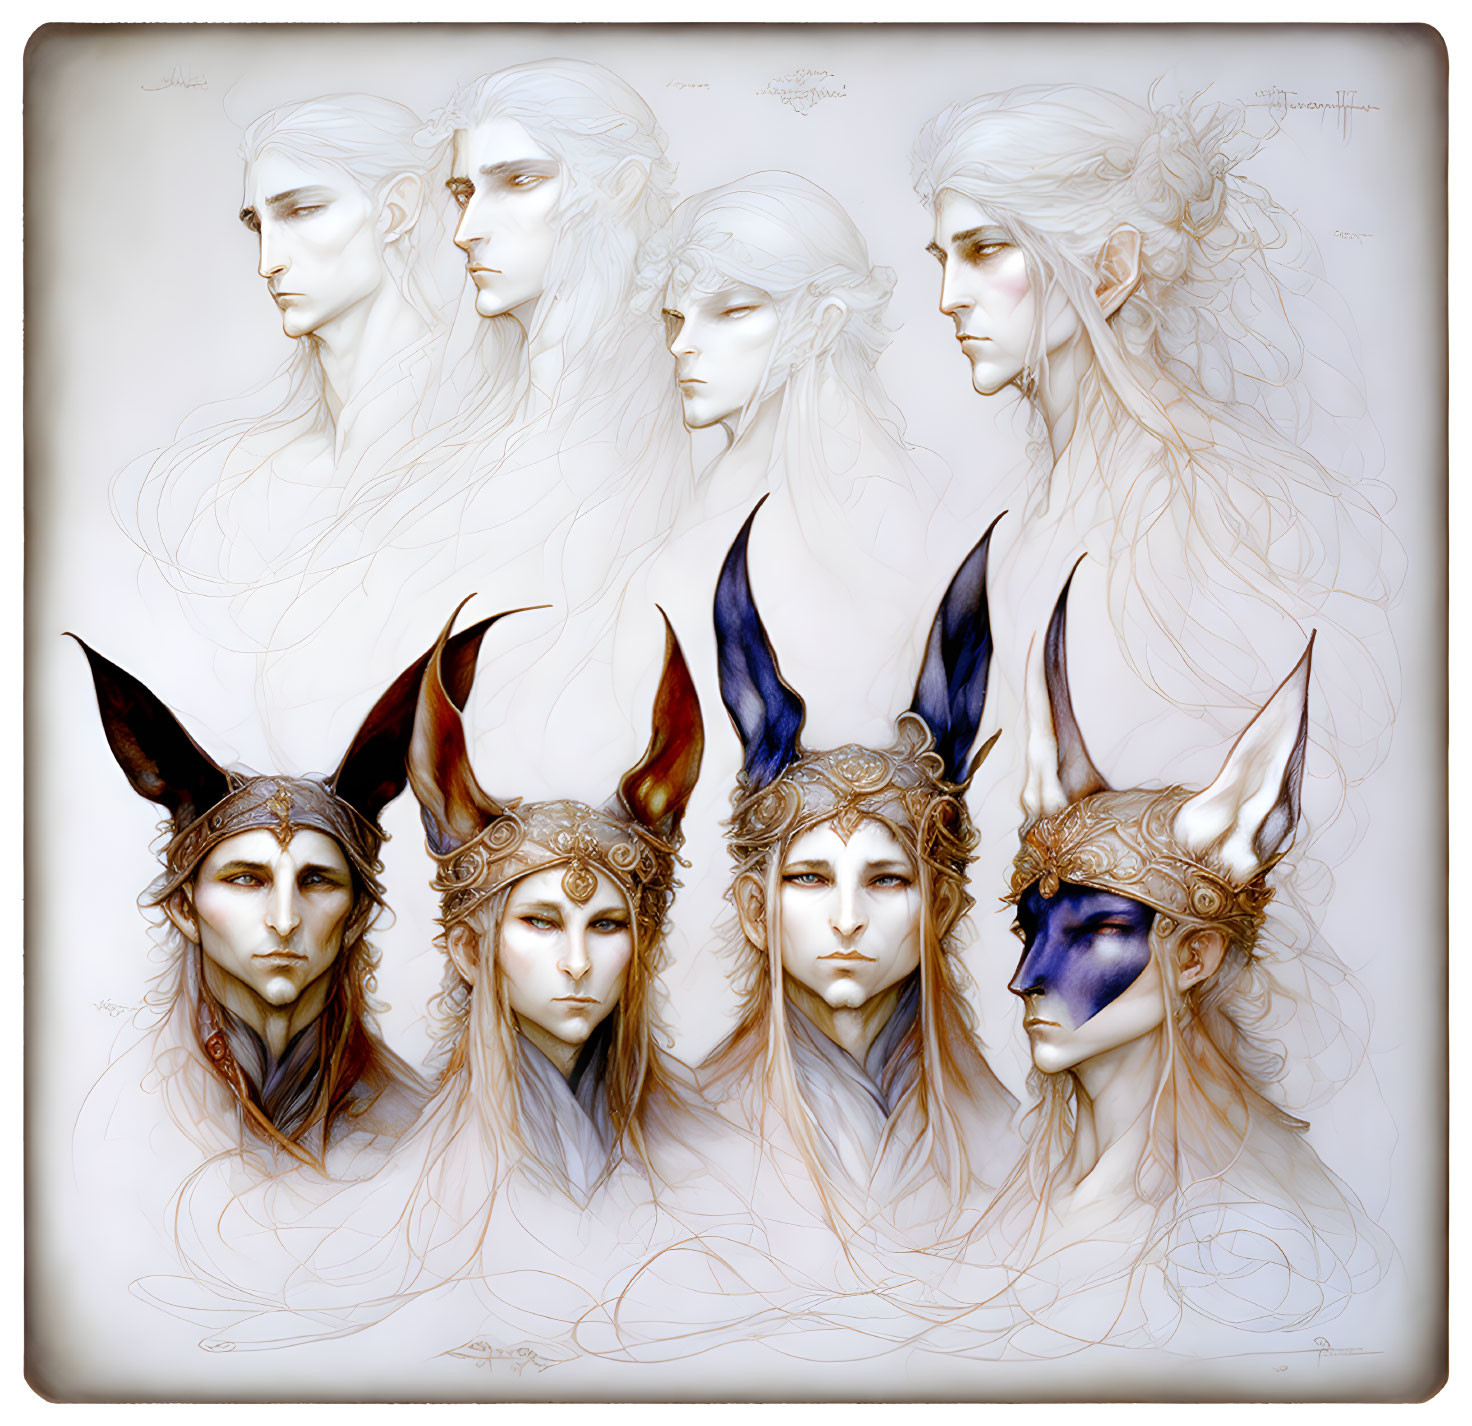 Mythical beings sketches with elf-like ears and horned masks in sepia tone